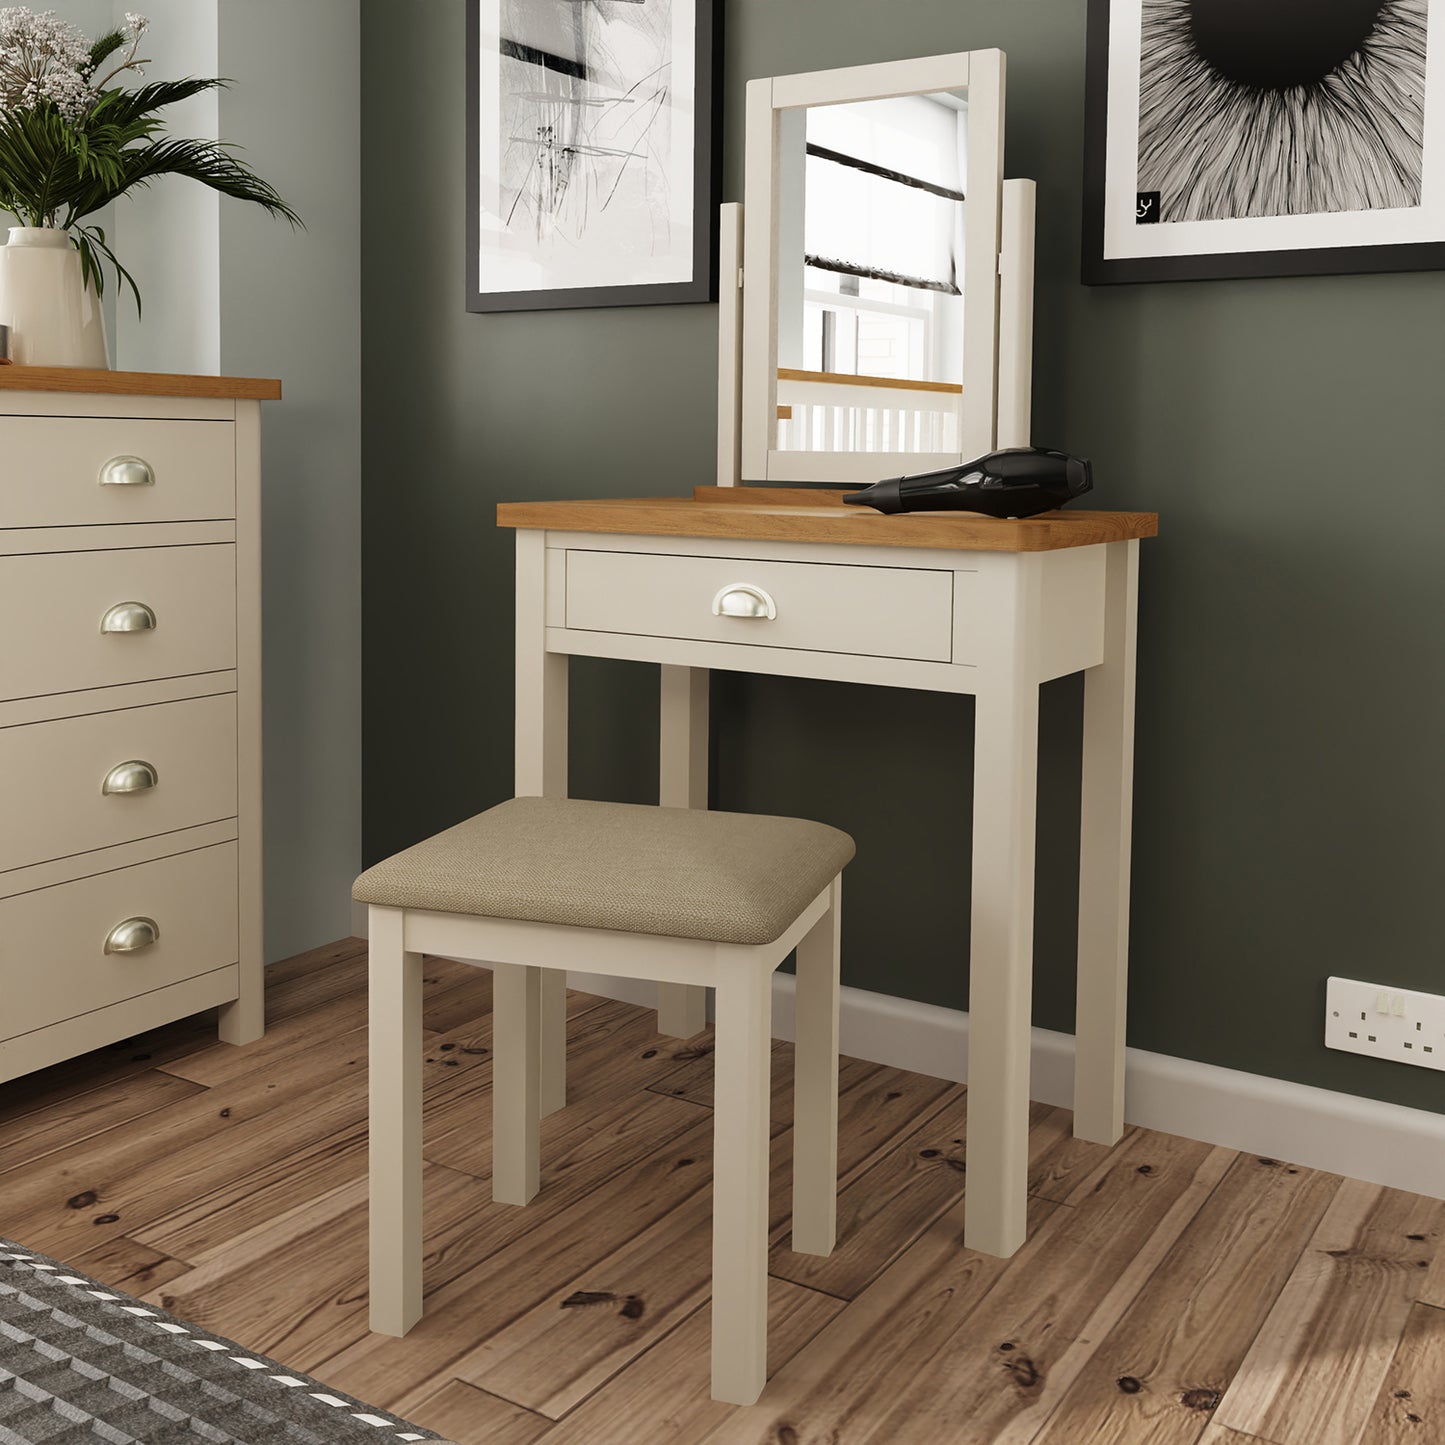 Pershore Painted Dressing Table